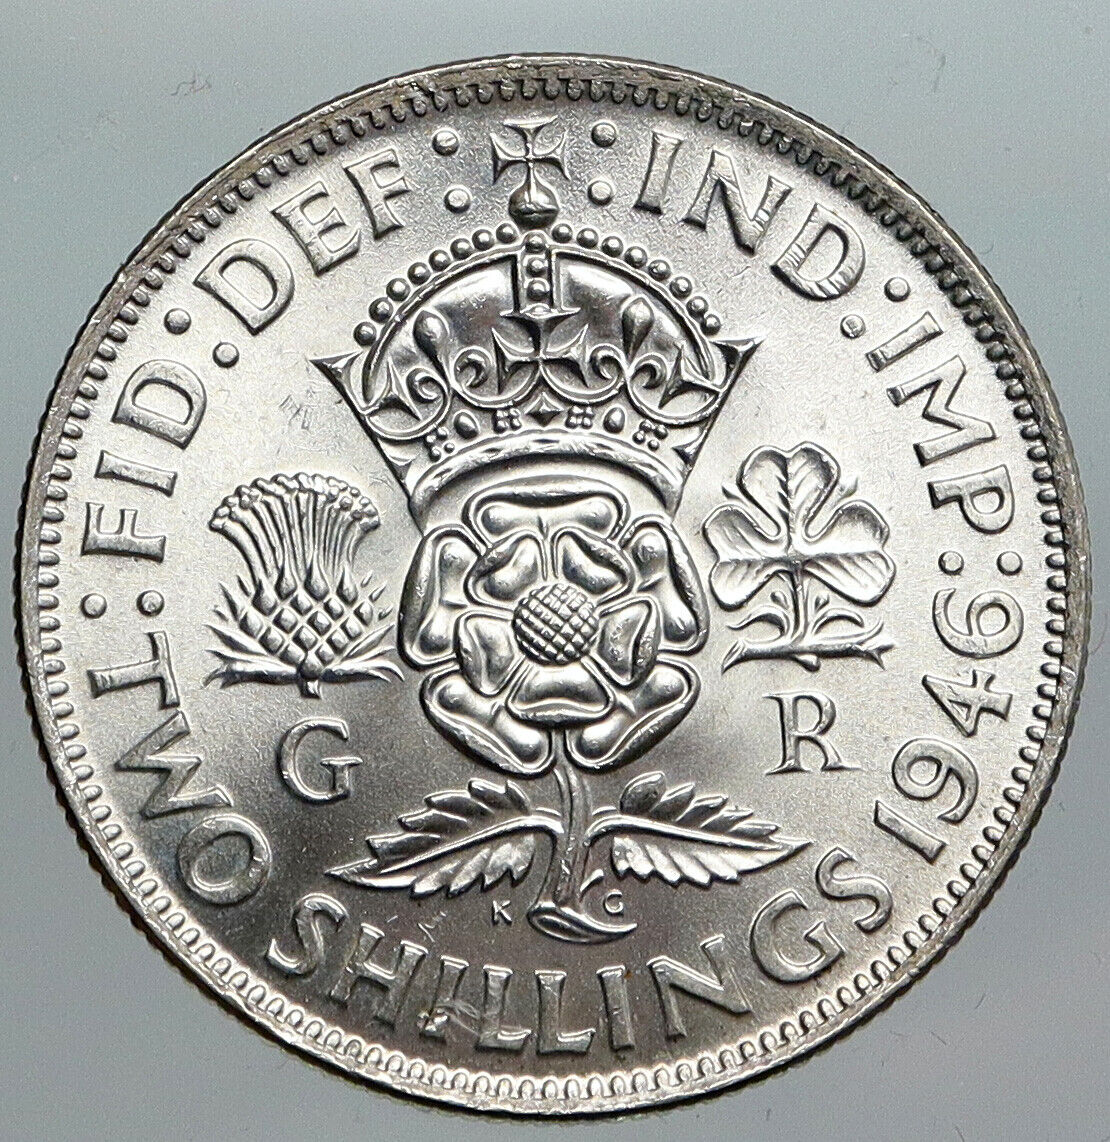 1946 UNITED KINGDOM UK Great Britain GEORGE VI Old Silver FLORIN 2S Coin i90496